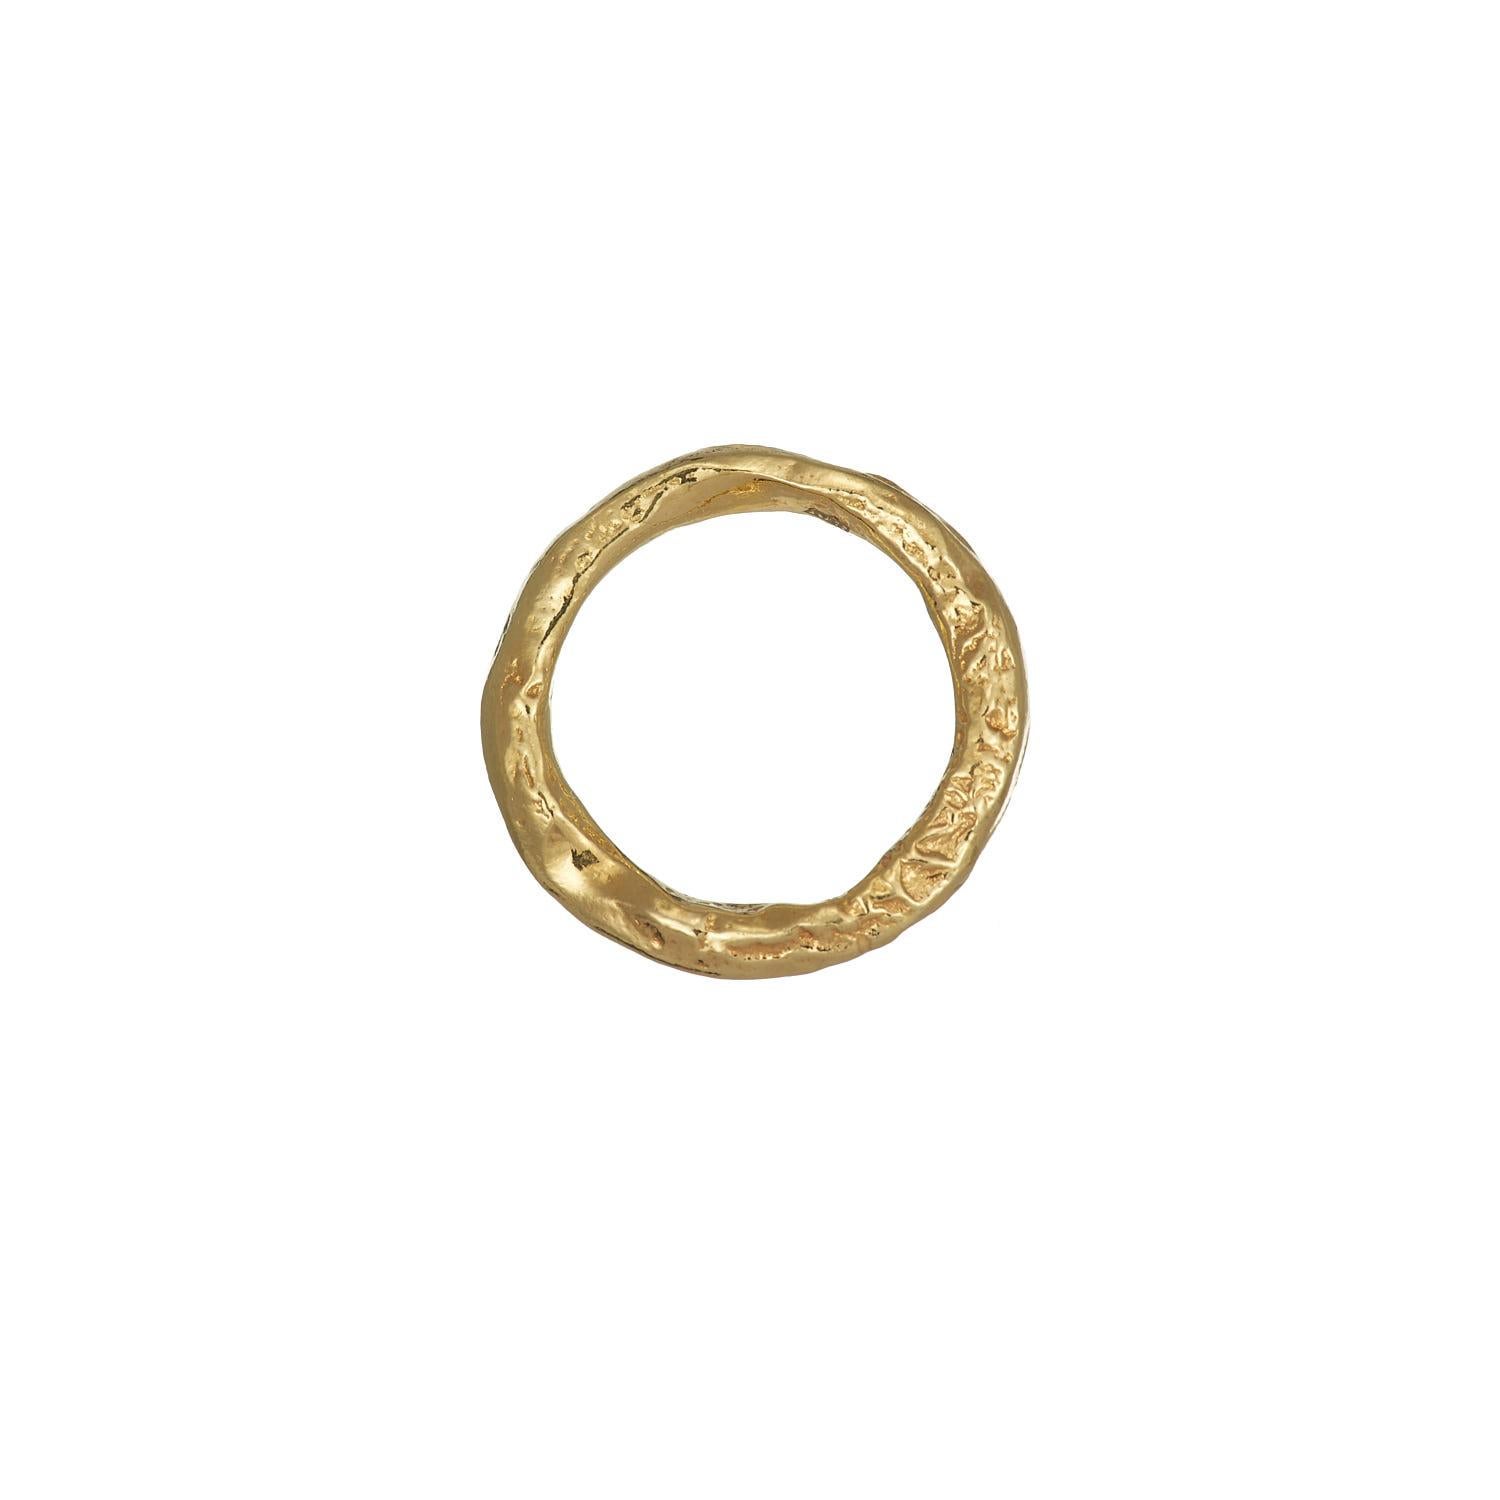 Papua Ring is handcrafted from 24ct gold plated bronze.

Papua New Guinea, an island in the southwestern Pacific Ocean, is the world's most diverse country, with more than 700 native tongues. Papua New Guinea jewelry were originally made of those